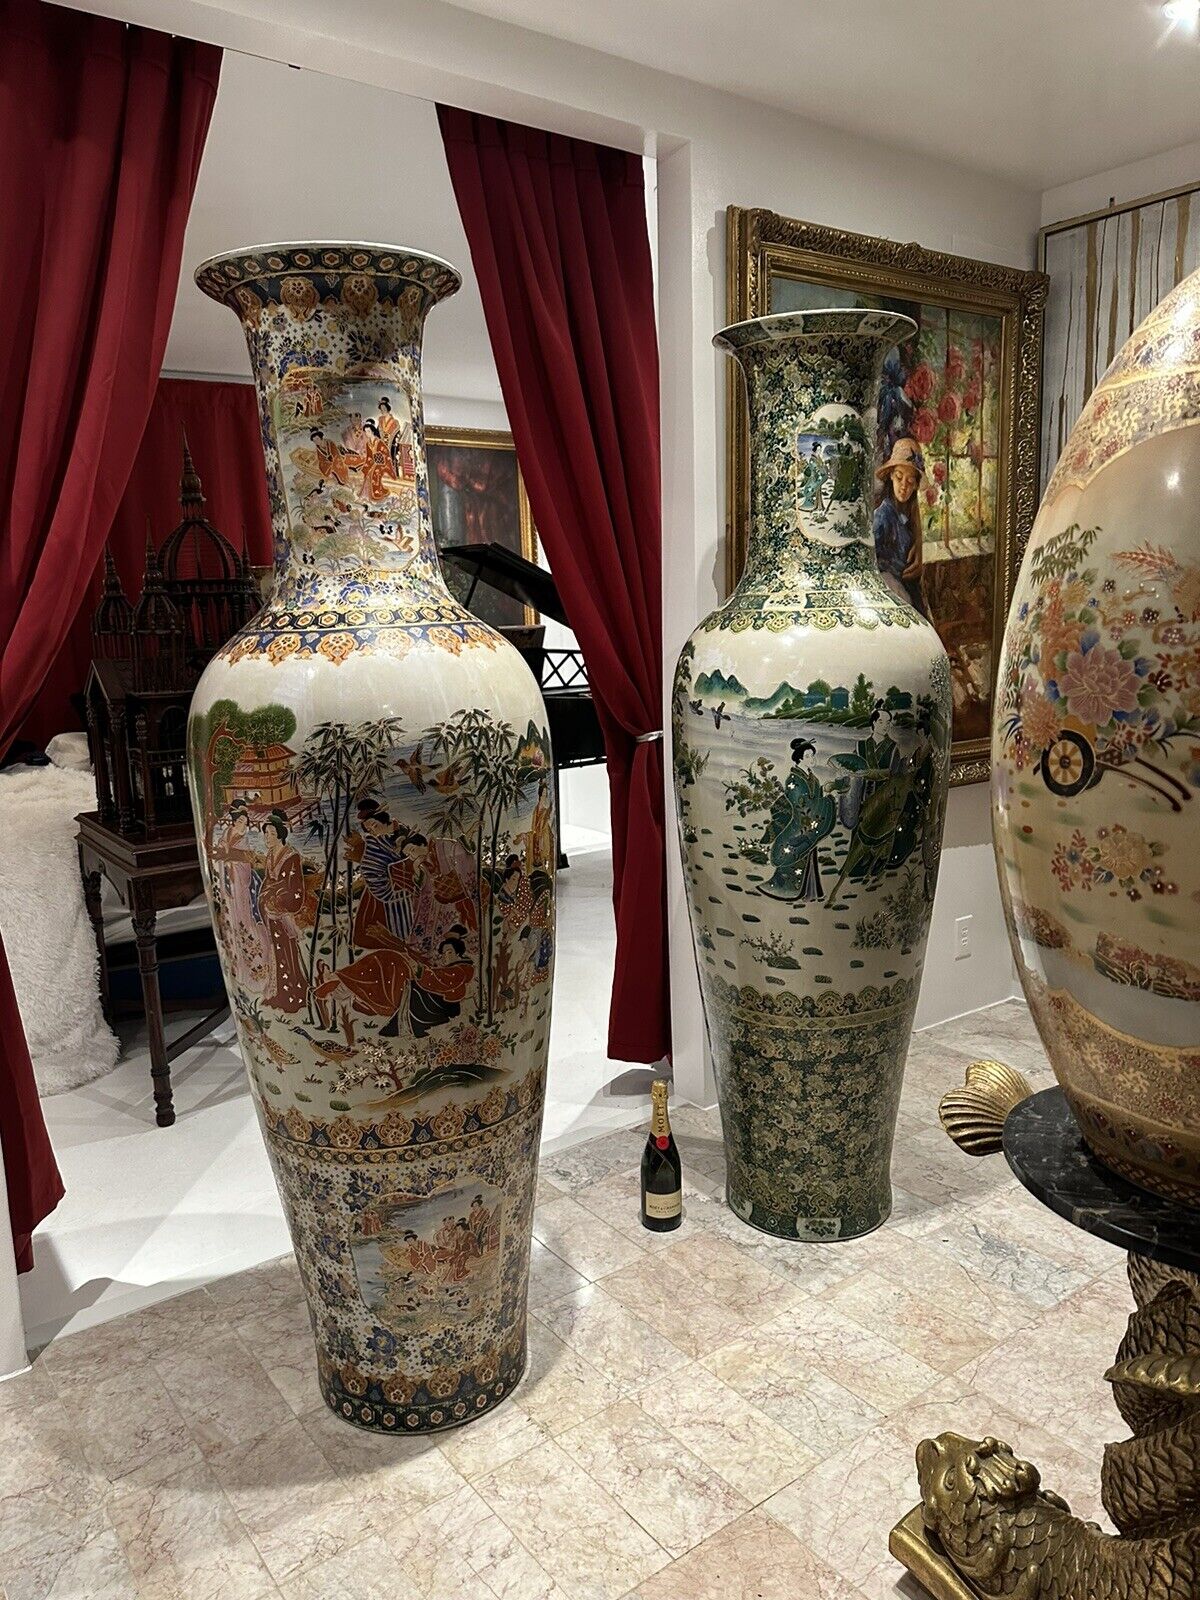 Monumental Pair of Porcelain Urns, Vases, Antique, 7 Feet Hand Painted, RARE